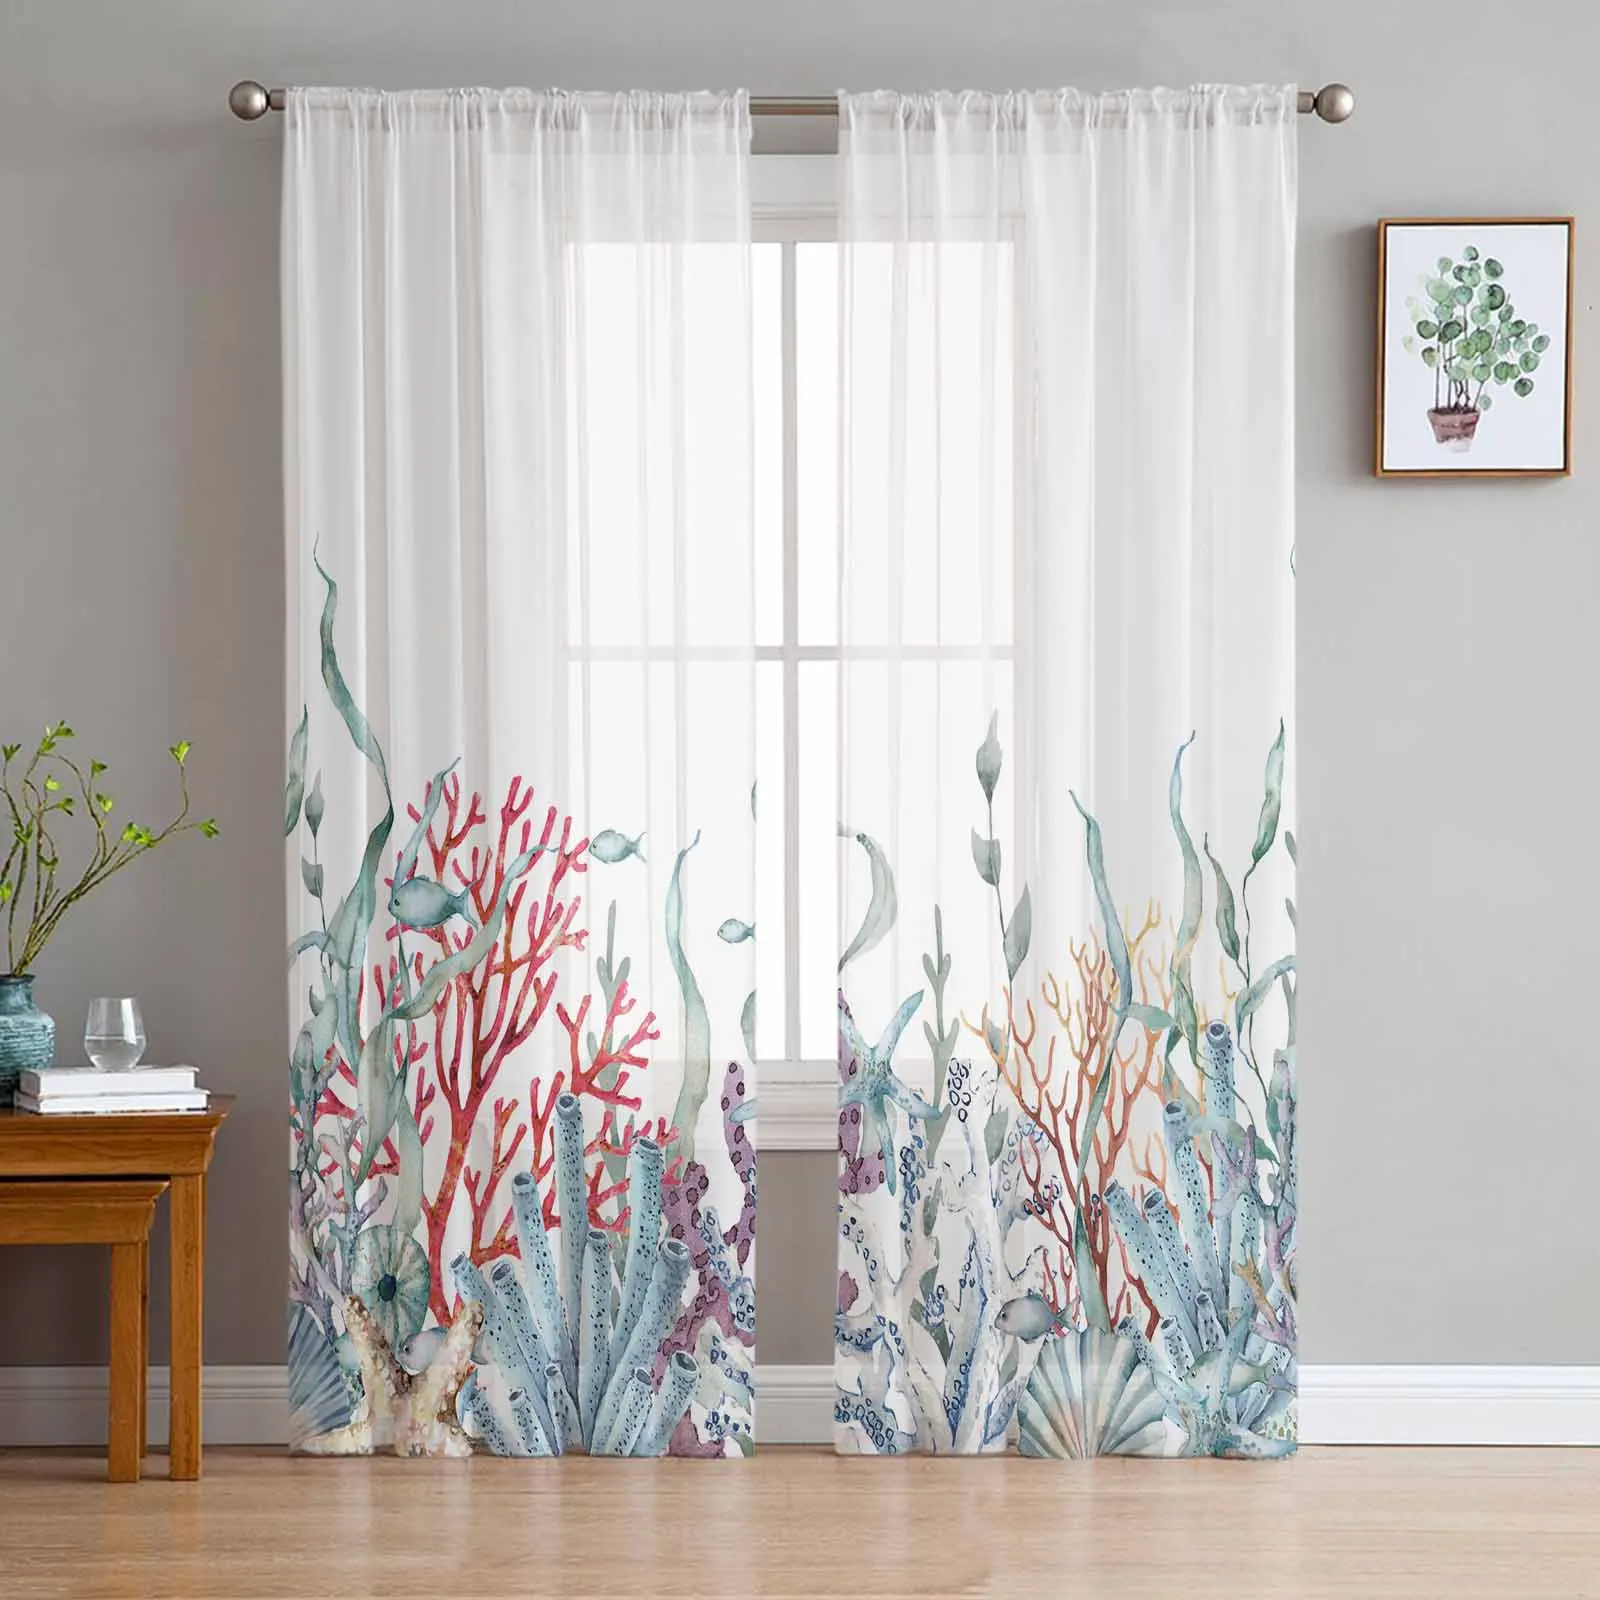 

Marine Coral In Summer Starfish Tulle Sheer Window Curtains for Living Room Kitchen Children Bedroom Voile Hanging Curtain